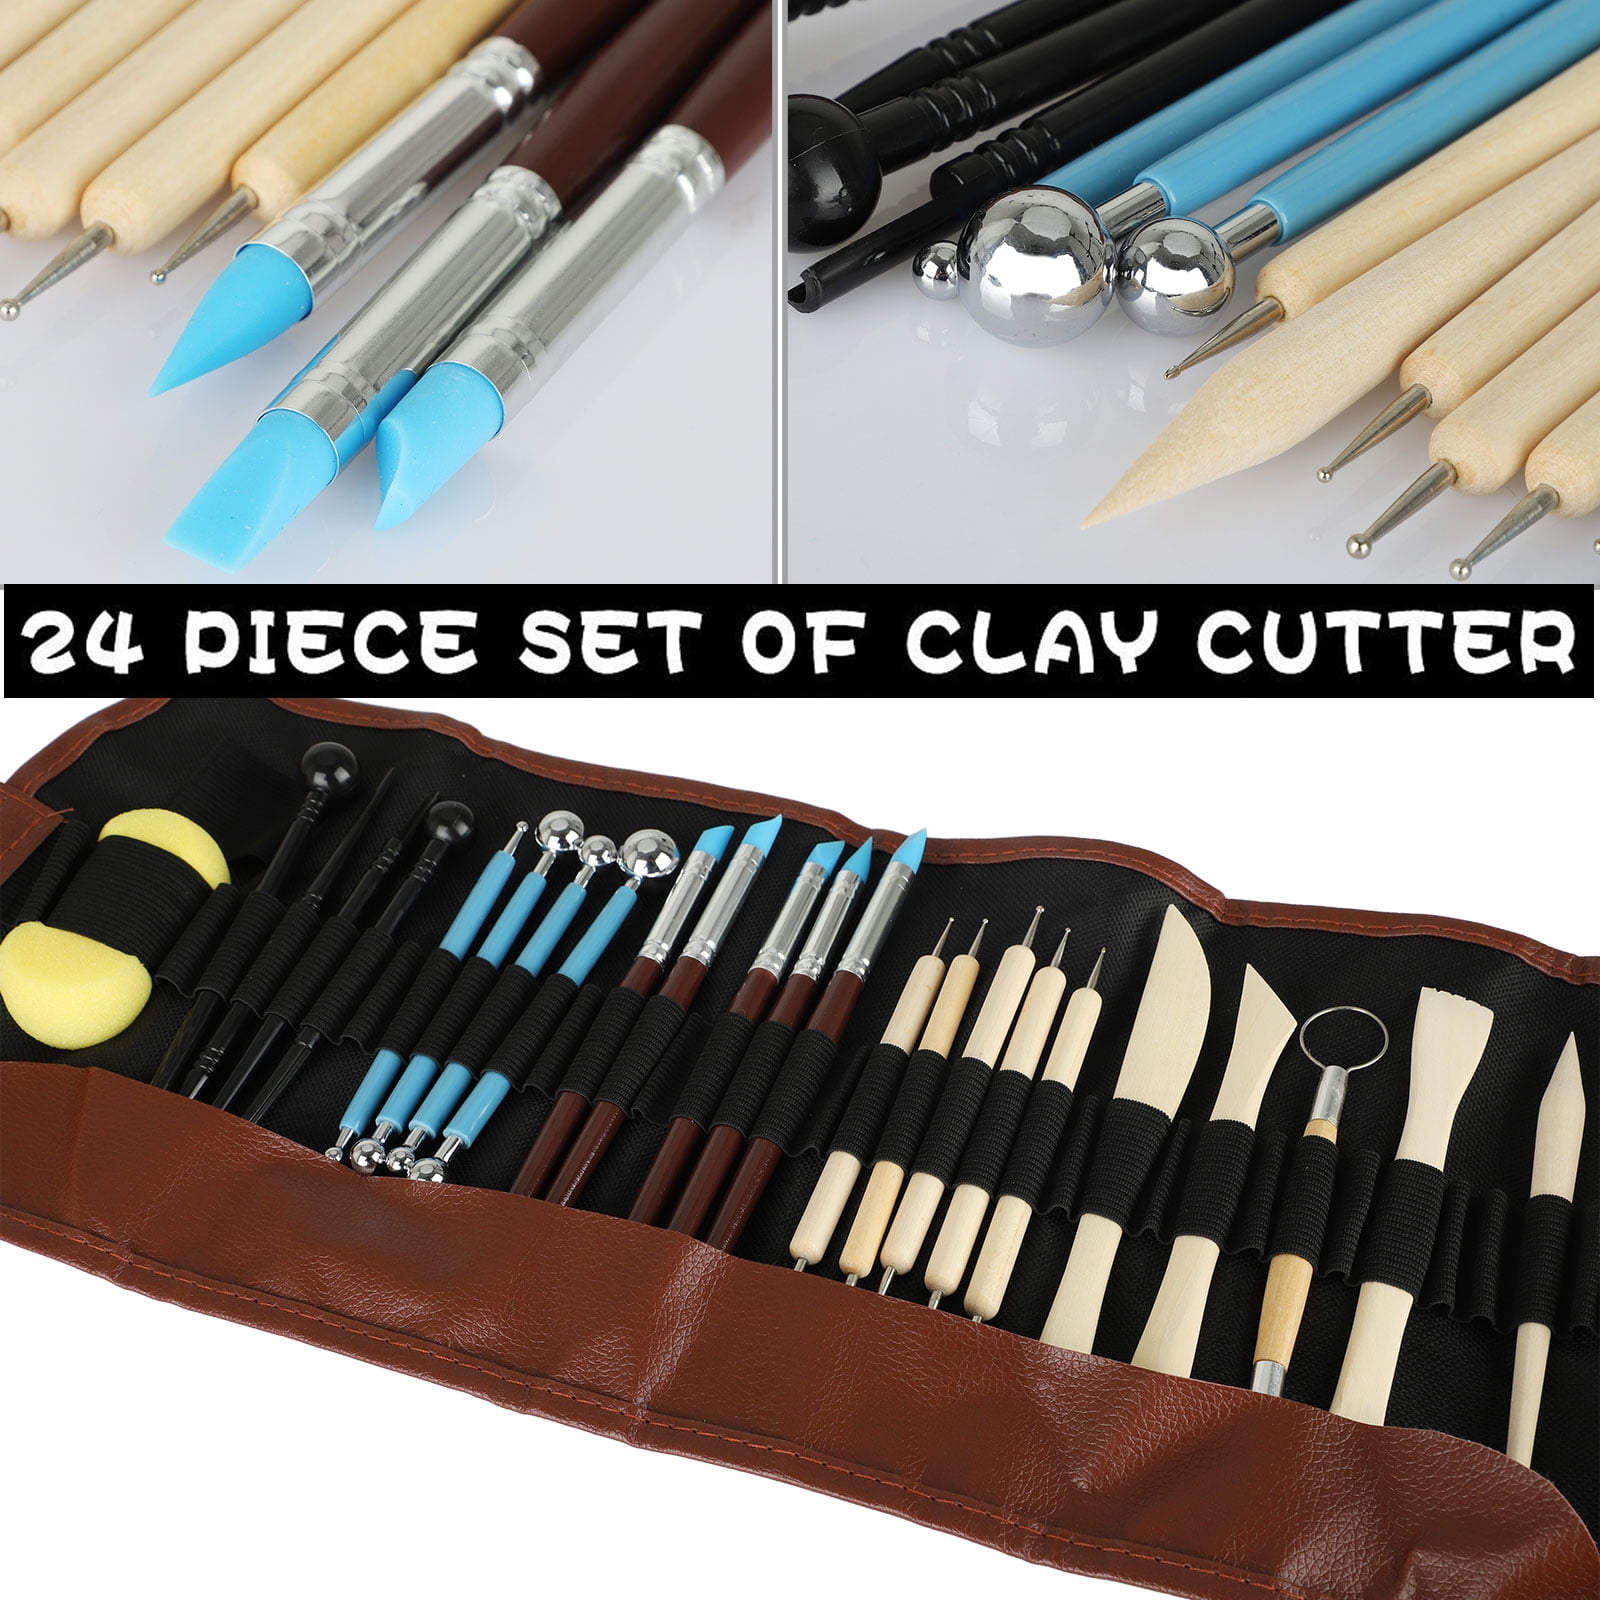 18pcs Clay Sculpting Carving Pottery Tools Polymer Modeling DIY Sculpture Craft 